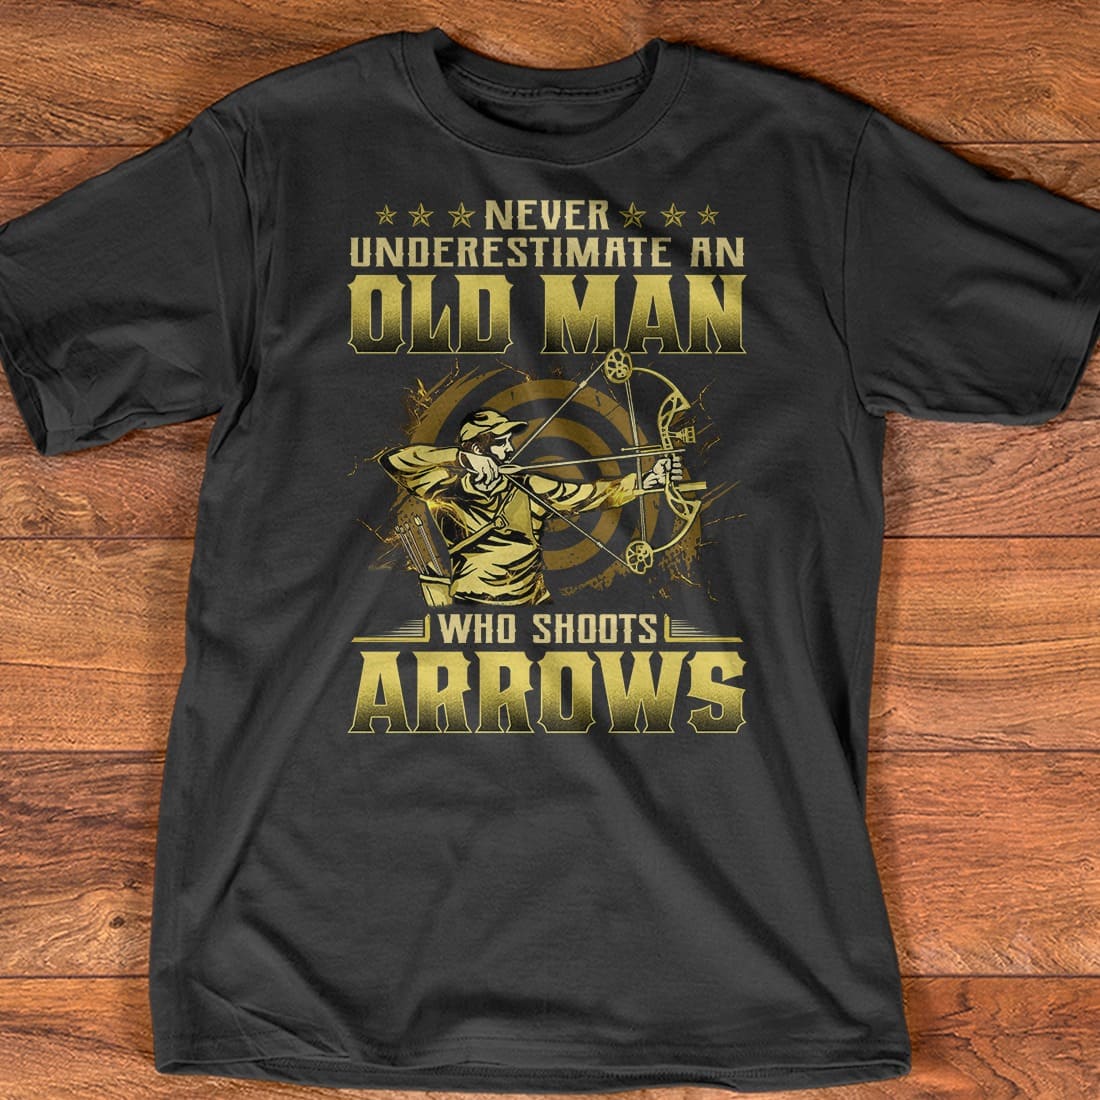 Never underestimate an old man who shoots arrows - Old man the archer, old man loves archery